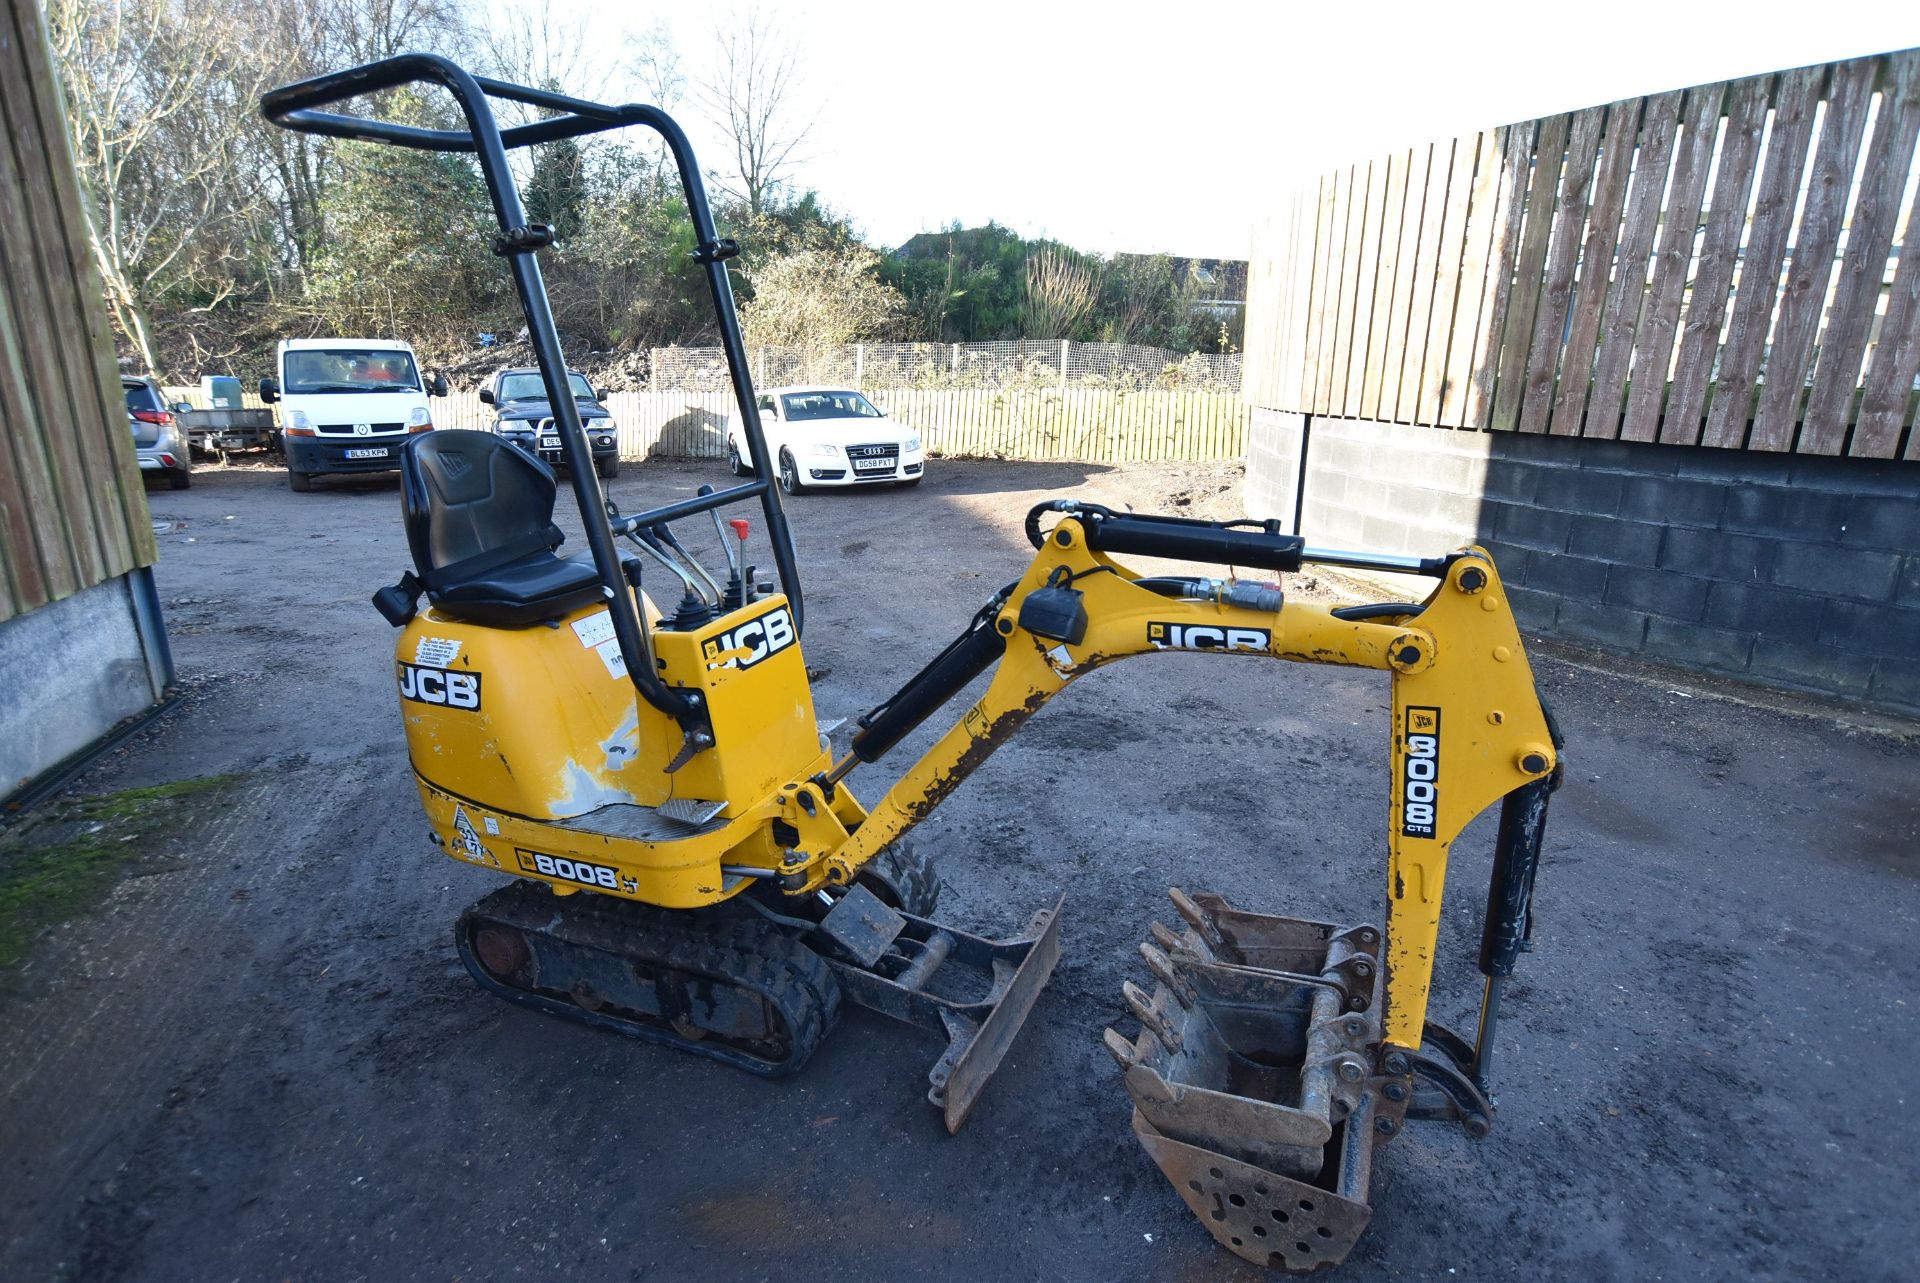 JCB 8008 CTS 950kg TRACKED COMPACT EXCAVATOR, serial no. 02410775, year of manufacture 2015, - Image 5 of 11